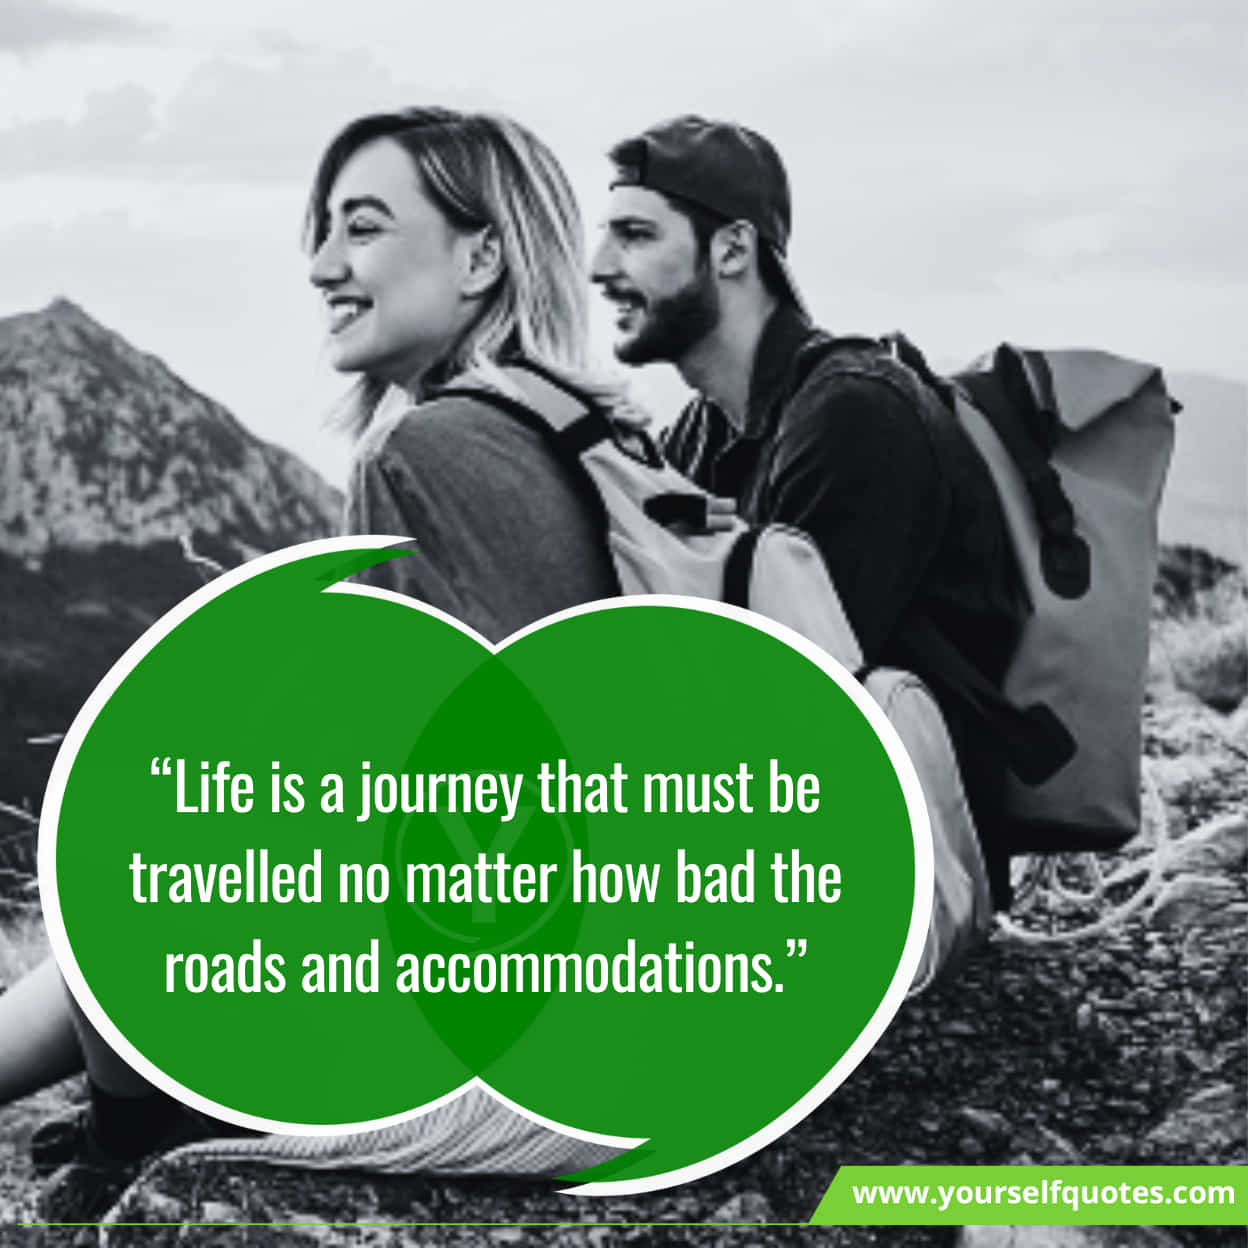 Inspiring Quotes On Journey